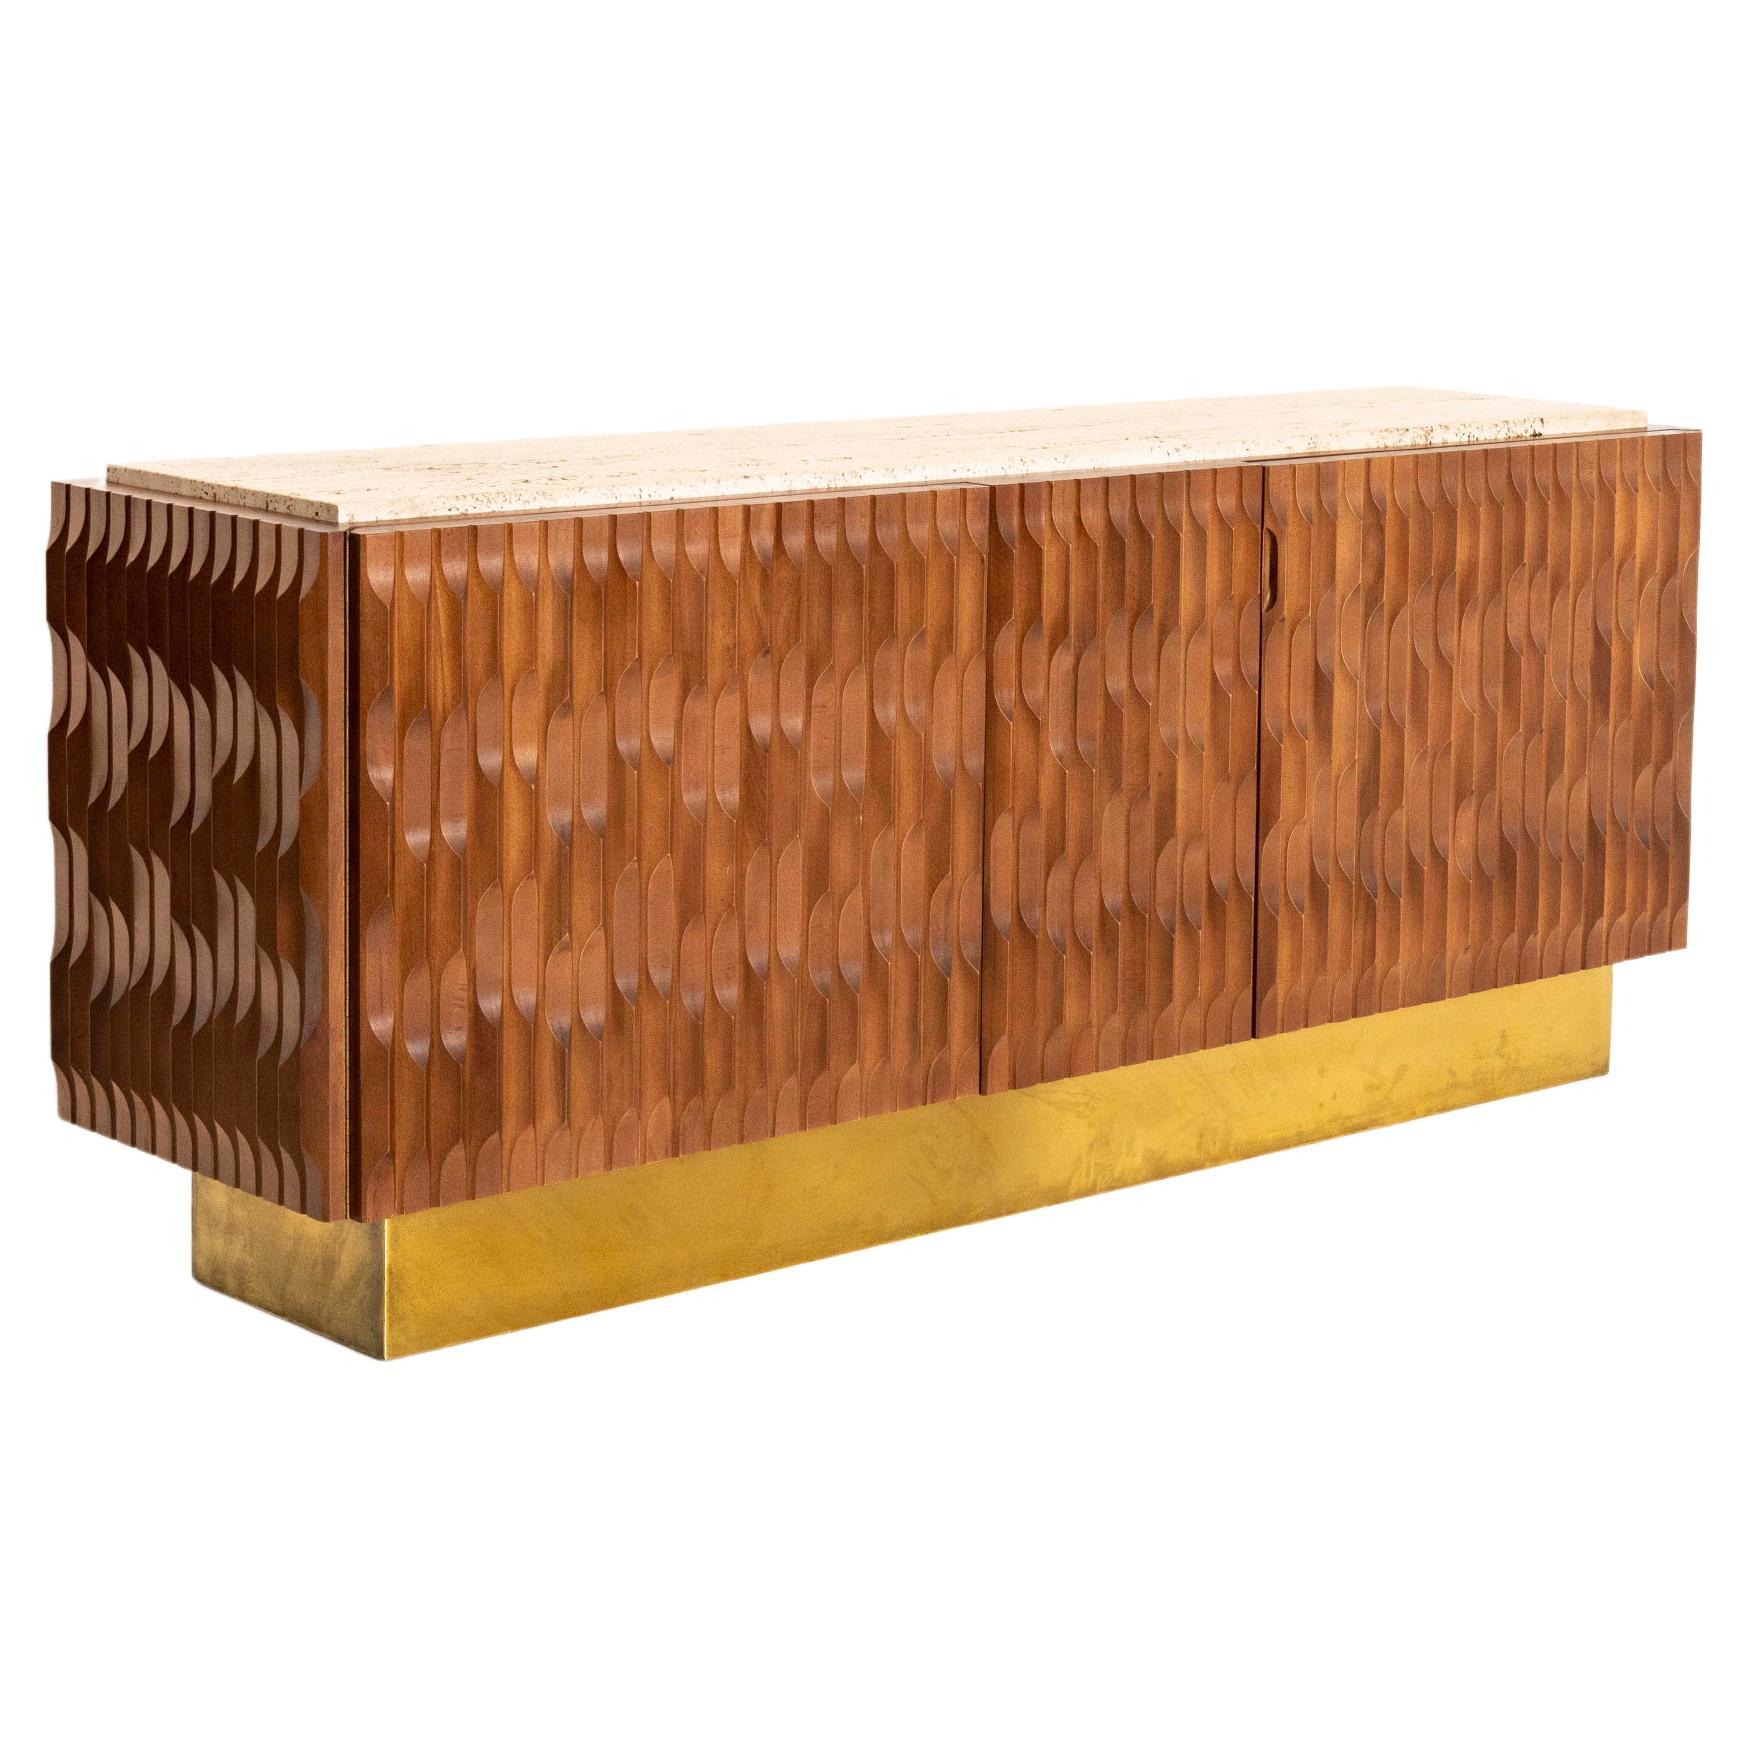 Italian Brutalist Sideboard with Wood, Brass and Travertine, 1970s For Sale